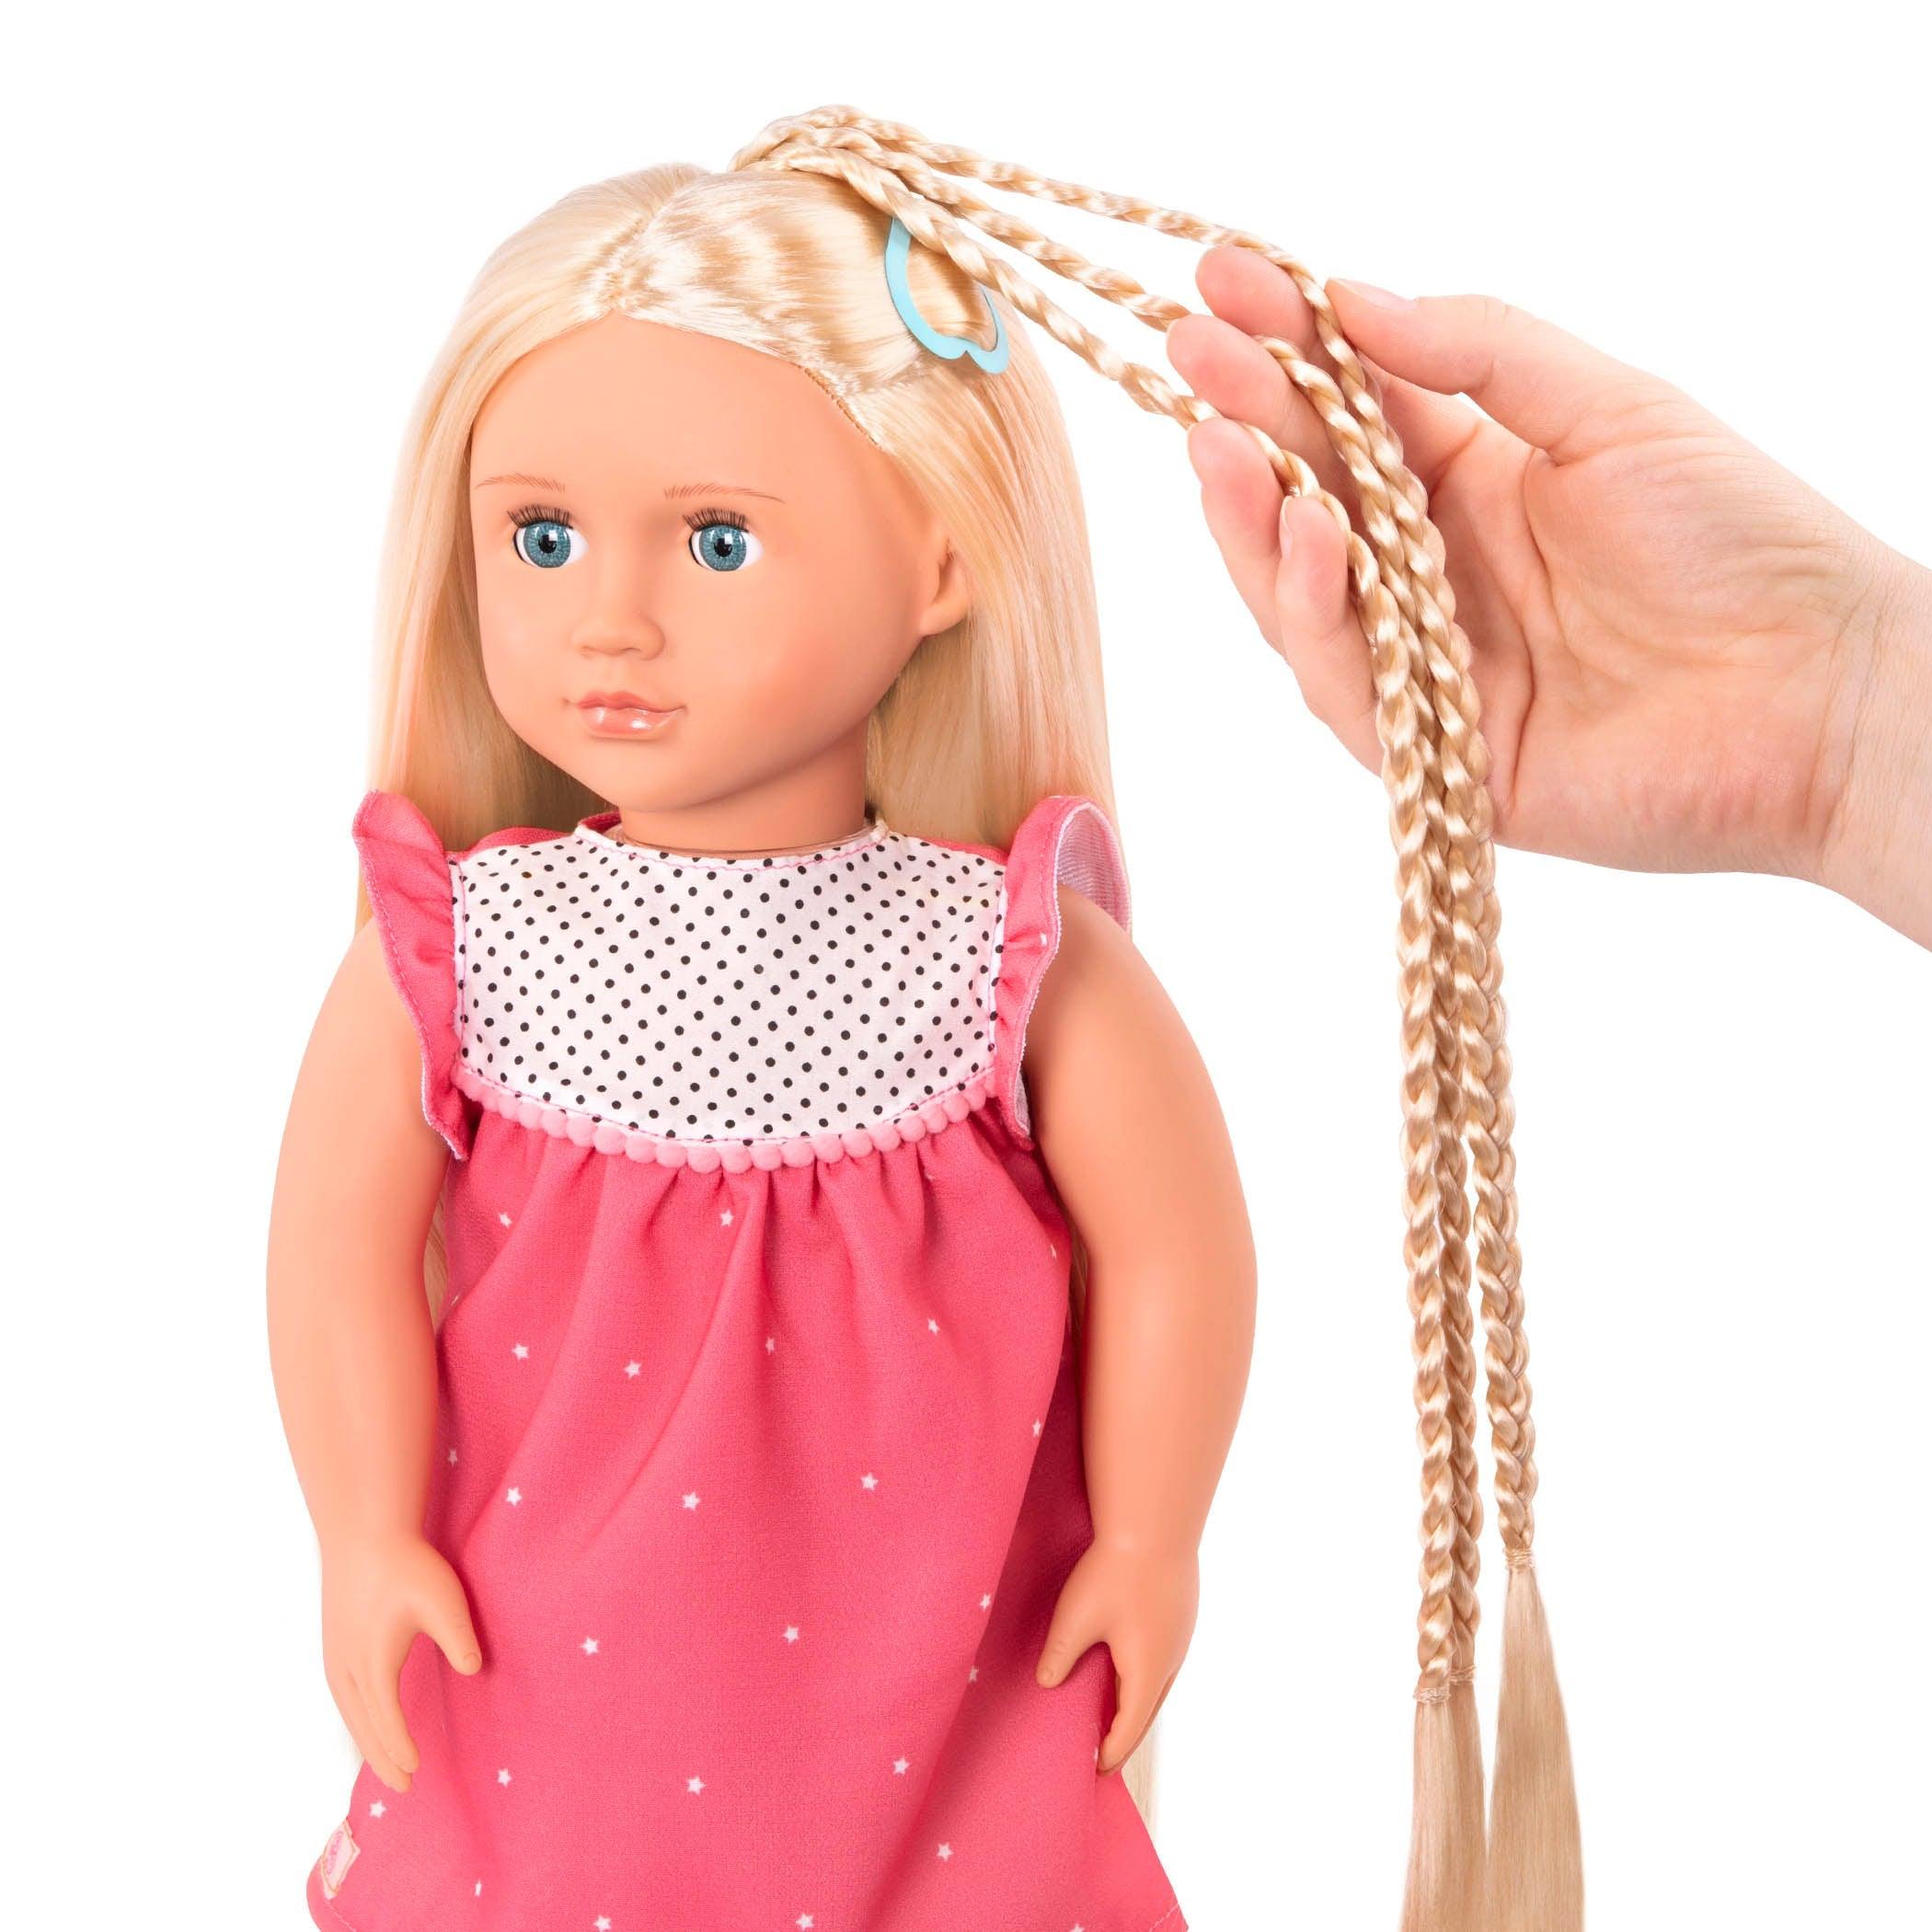 Our Generation: Hayley 46 cm hair styling doll